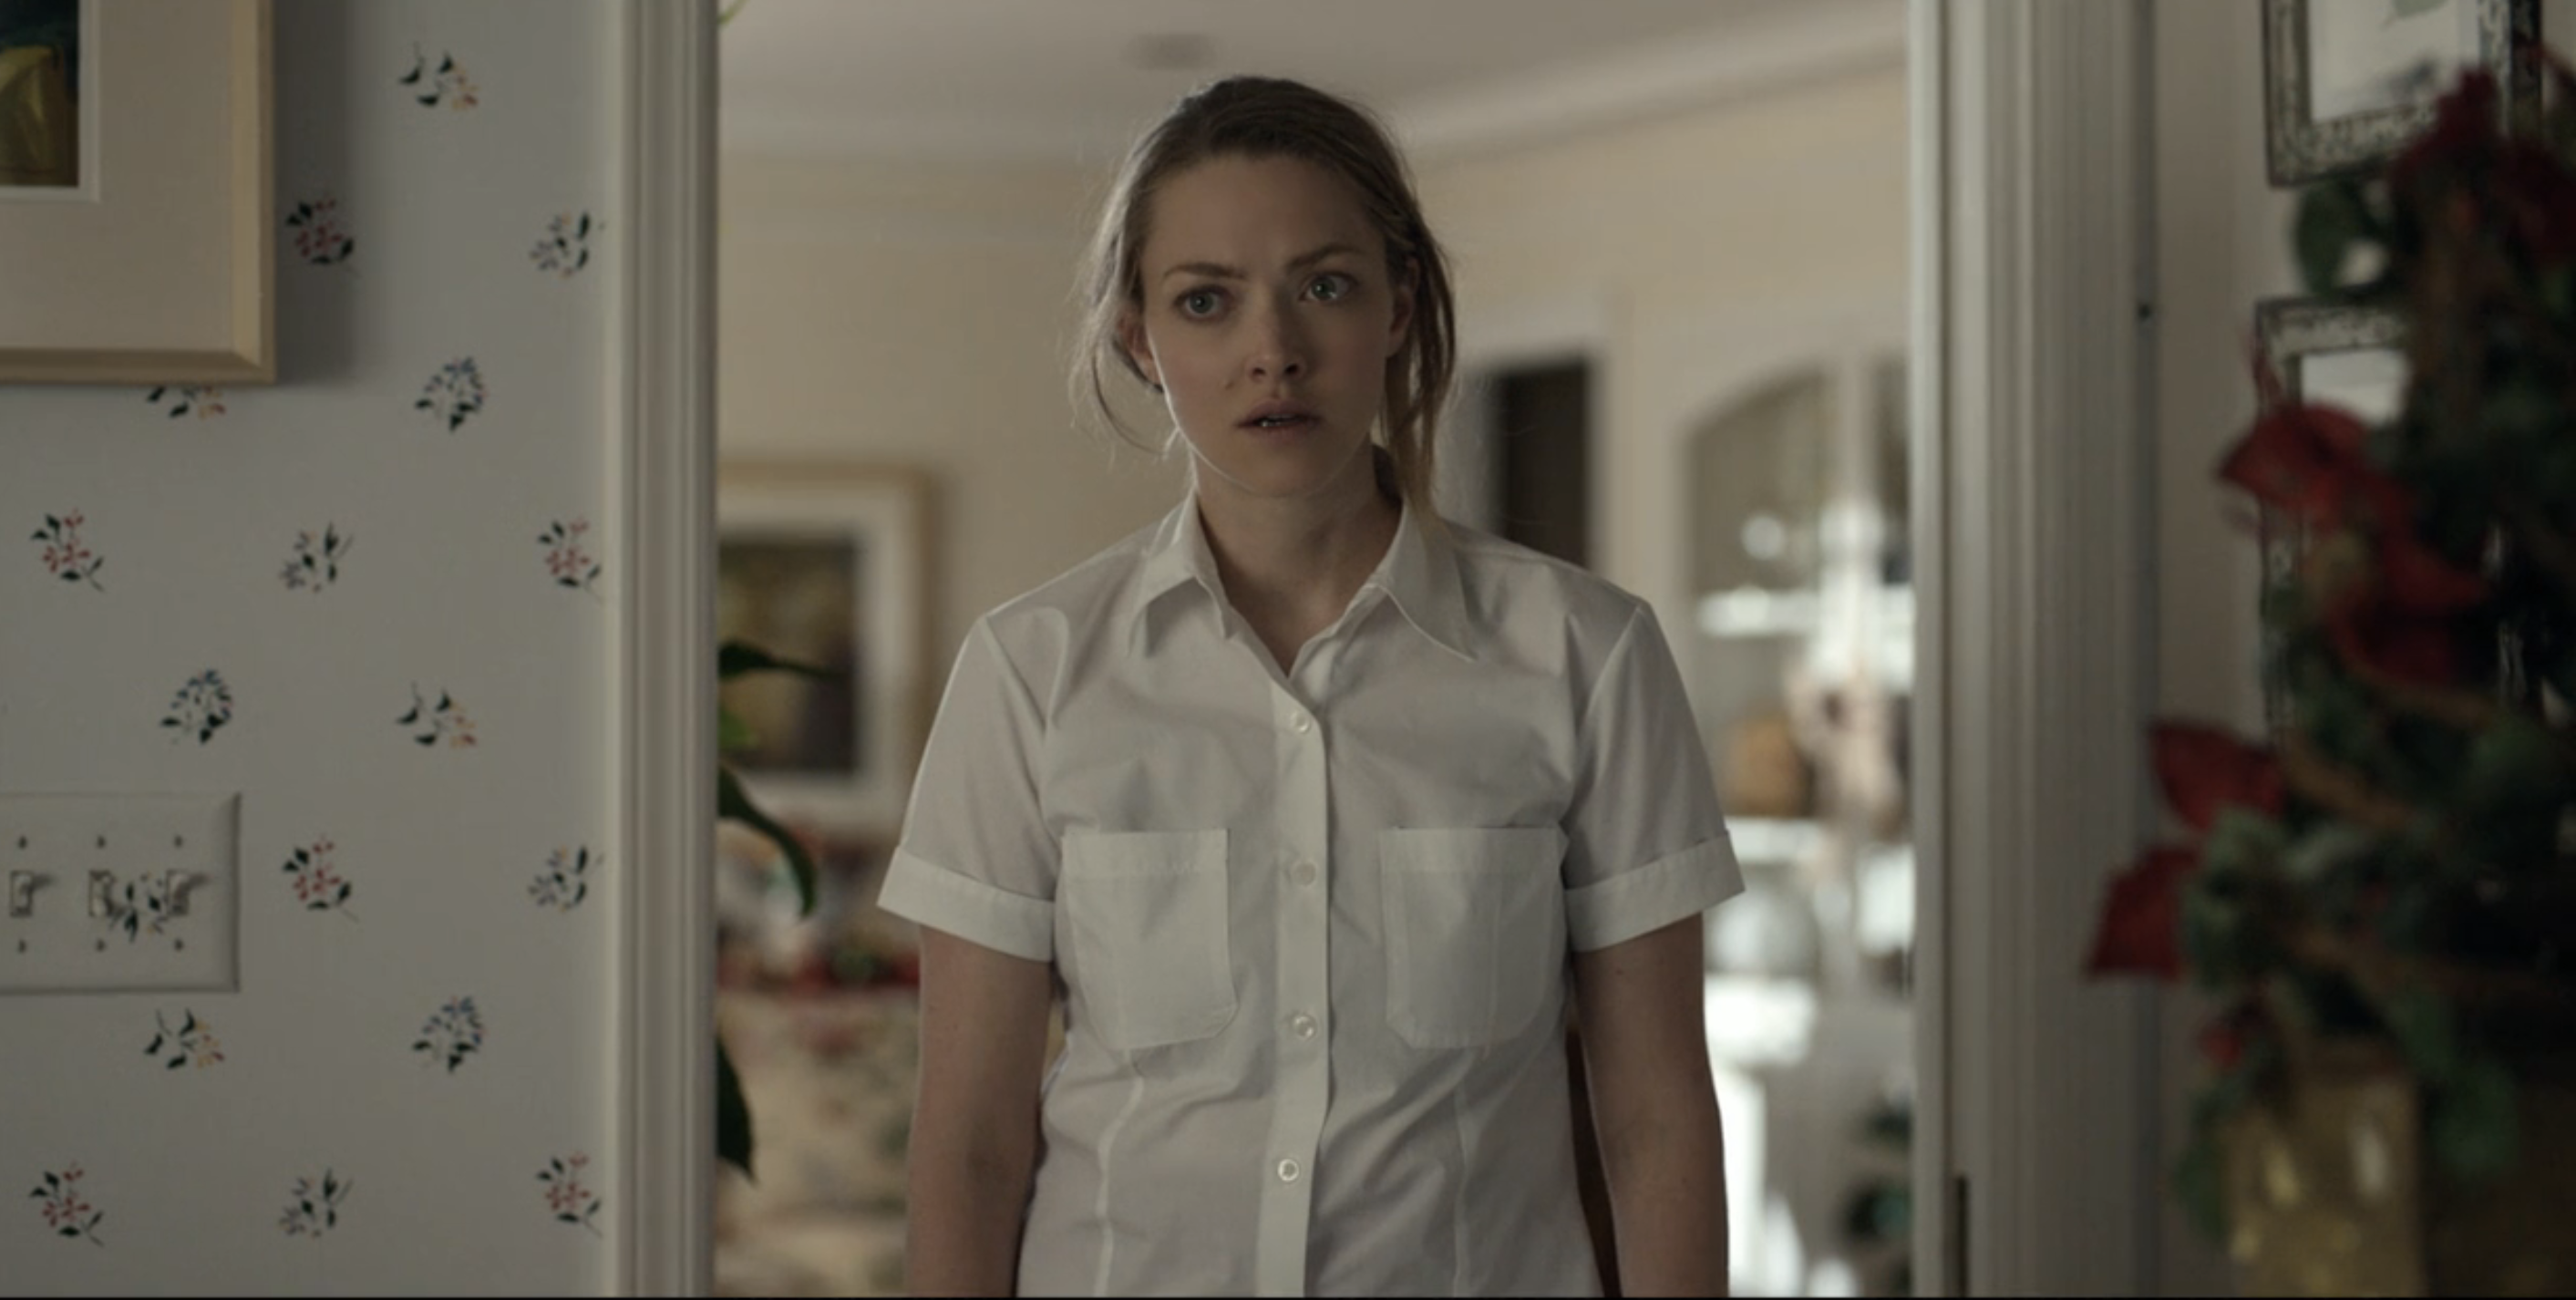 Elizabeth in a collared shirt looks surprised in a home setting